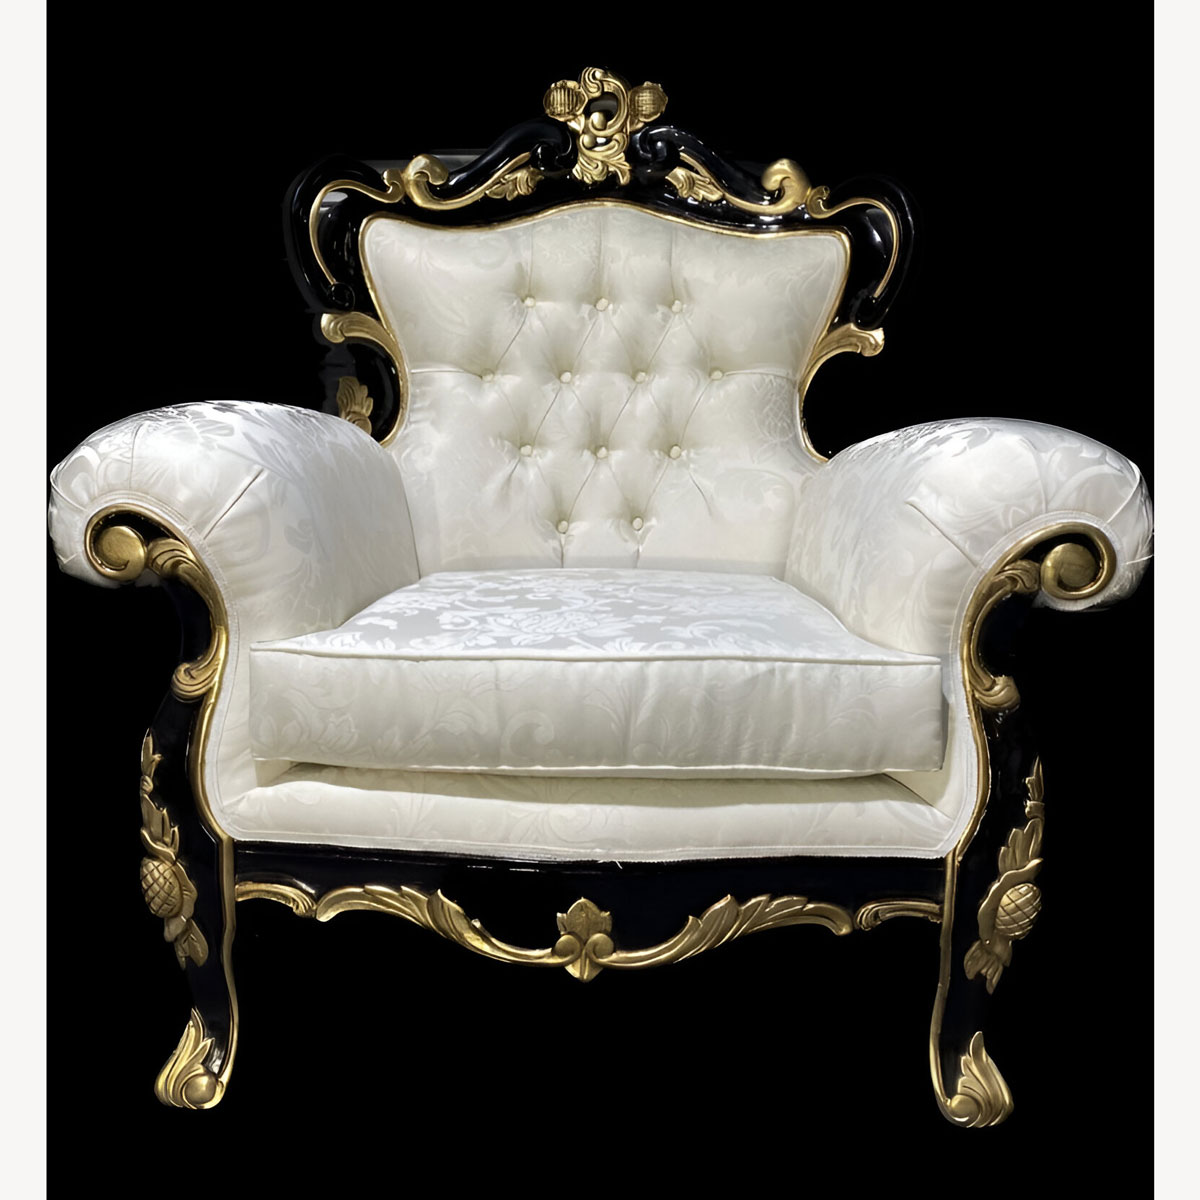 Antiqued Gold Leaf Louis Huge Arm Chair Black With Gold Shop Home Diva Shown In An Ivory Cream Damask Type Fabric 1 - Hampshire Barn Interiors - Antiqued Gold Leaf Louis Huge Arm Chair Black With Gold Shop Home Diva Shown In An Ivory Cream Damask Type Fabric -